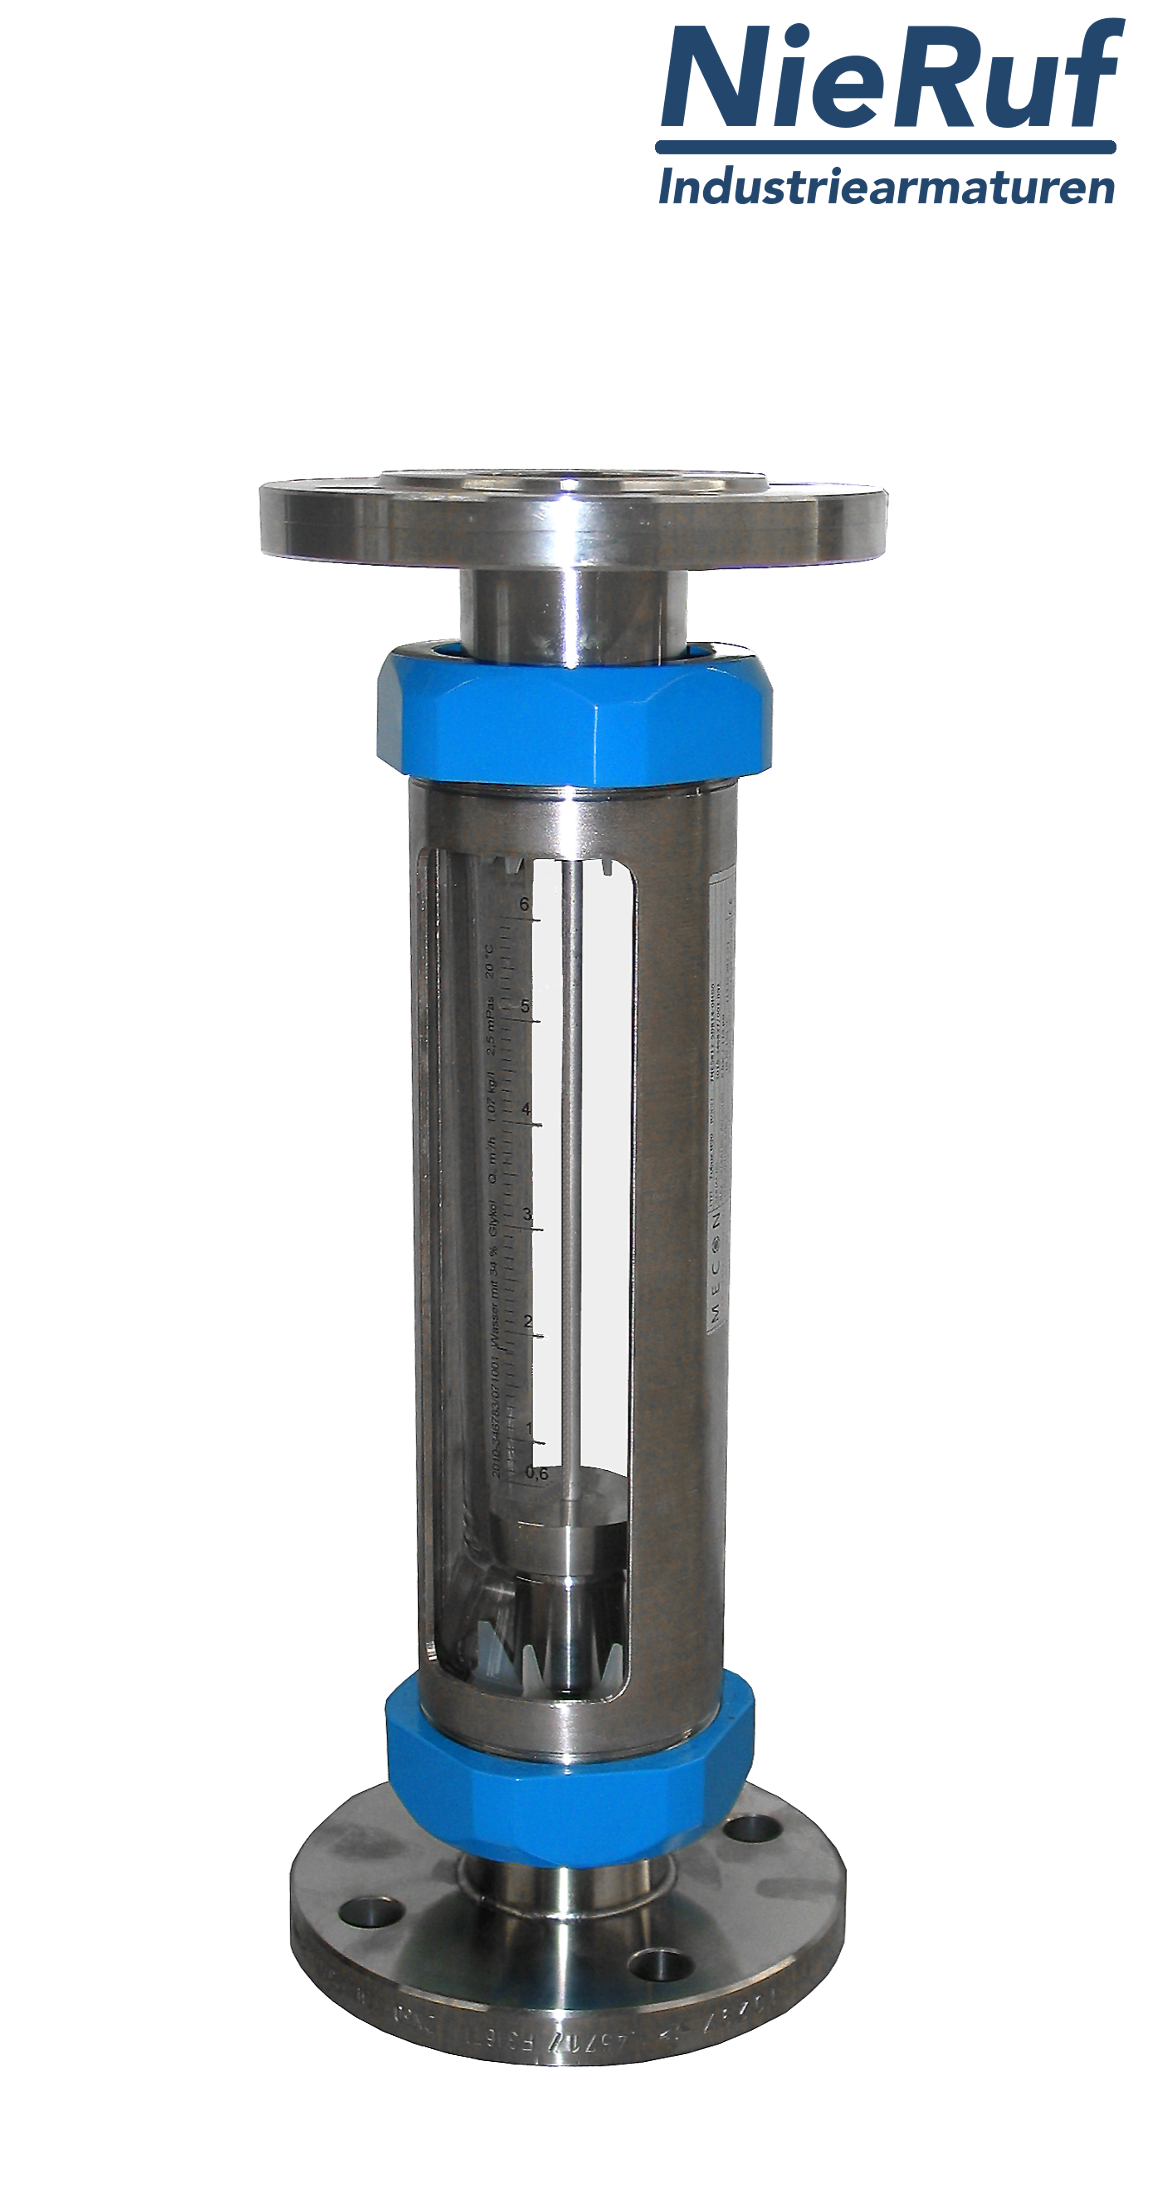 Variable area flowmeter stainless steel + borosilicate flange DN10 0.1 - 1.0 l/h water FKM